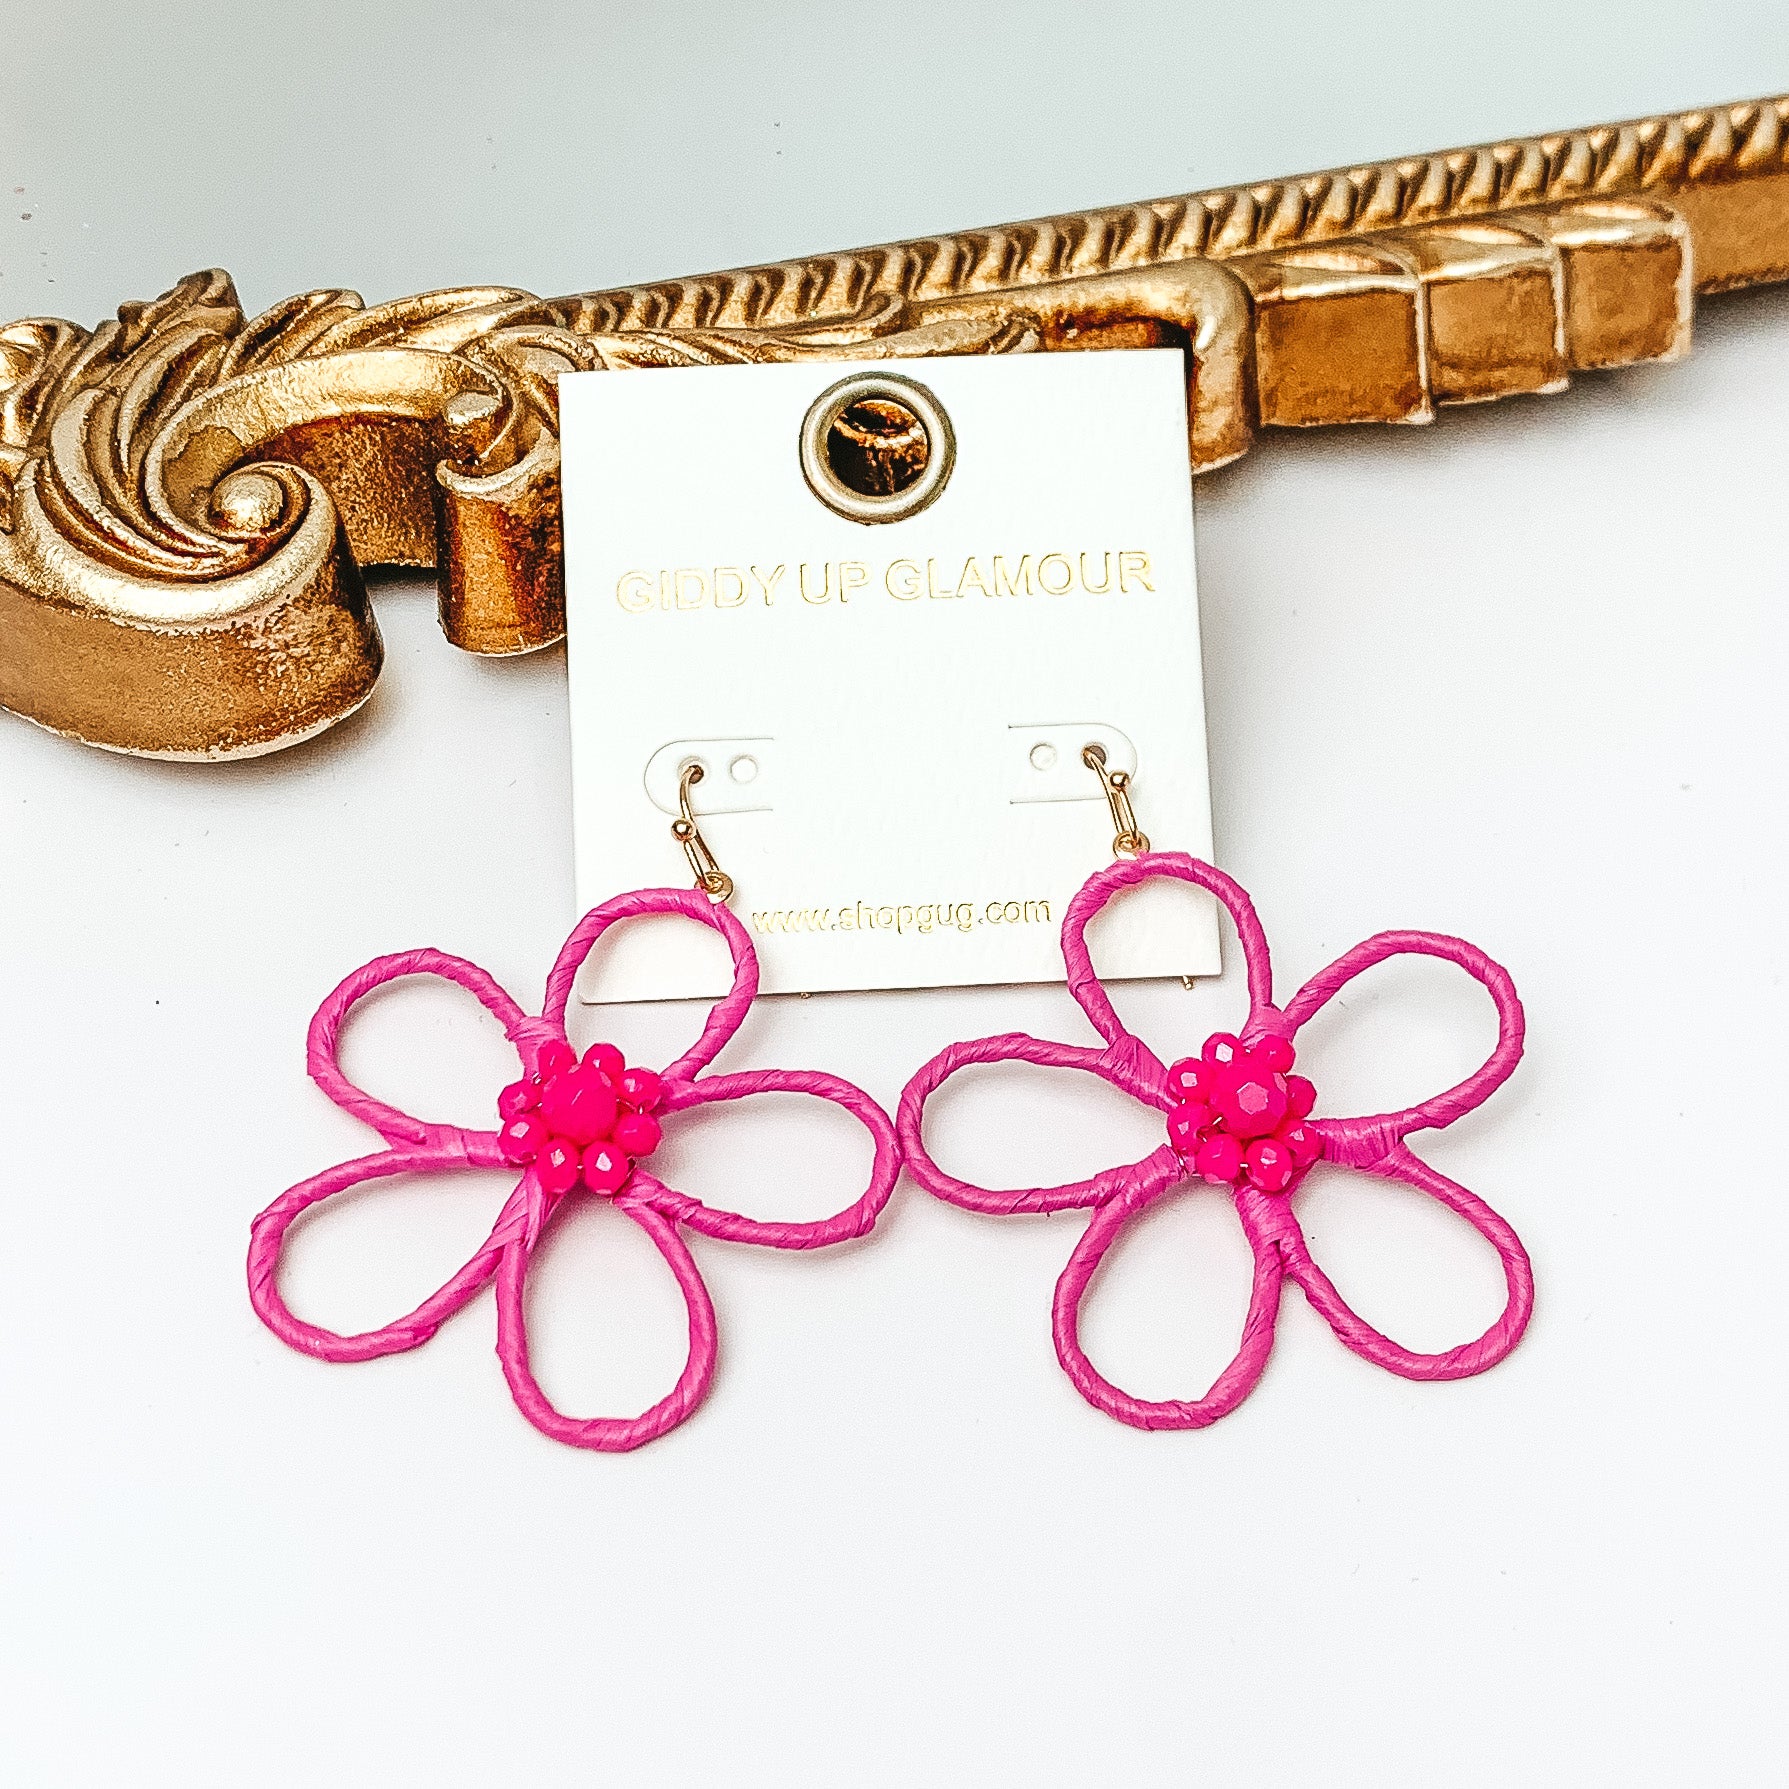 Pictured are gold fish hook earrings with a flower outline pendant. This pendant is fuchsia pink and has center fuchsia pink crystals. These earrings are pictured in front of a gold mirror on a white background. 